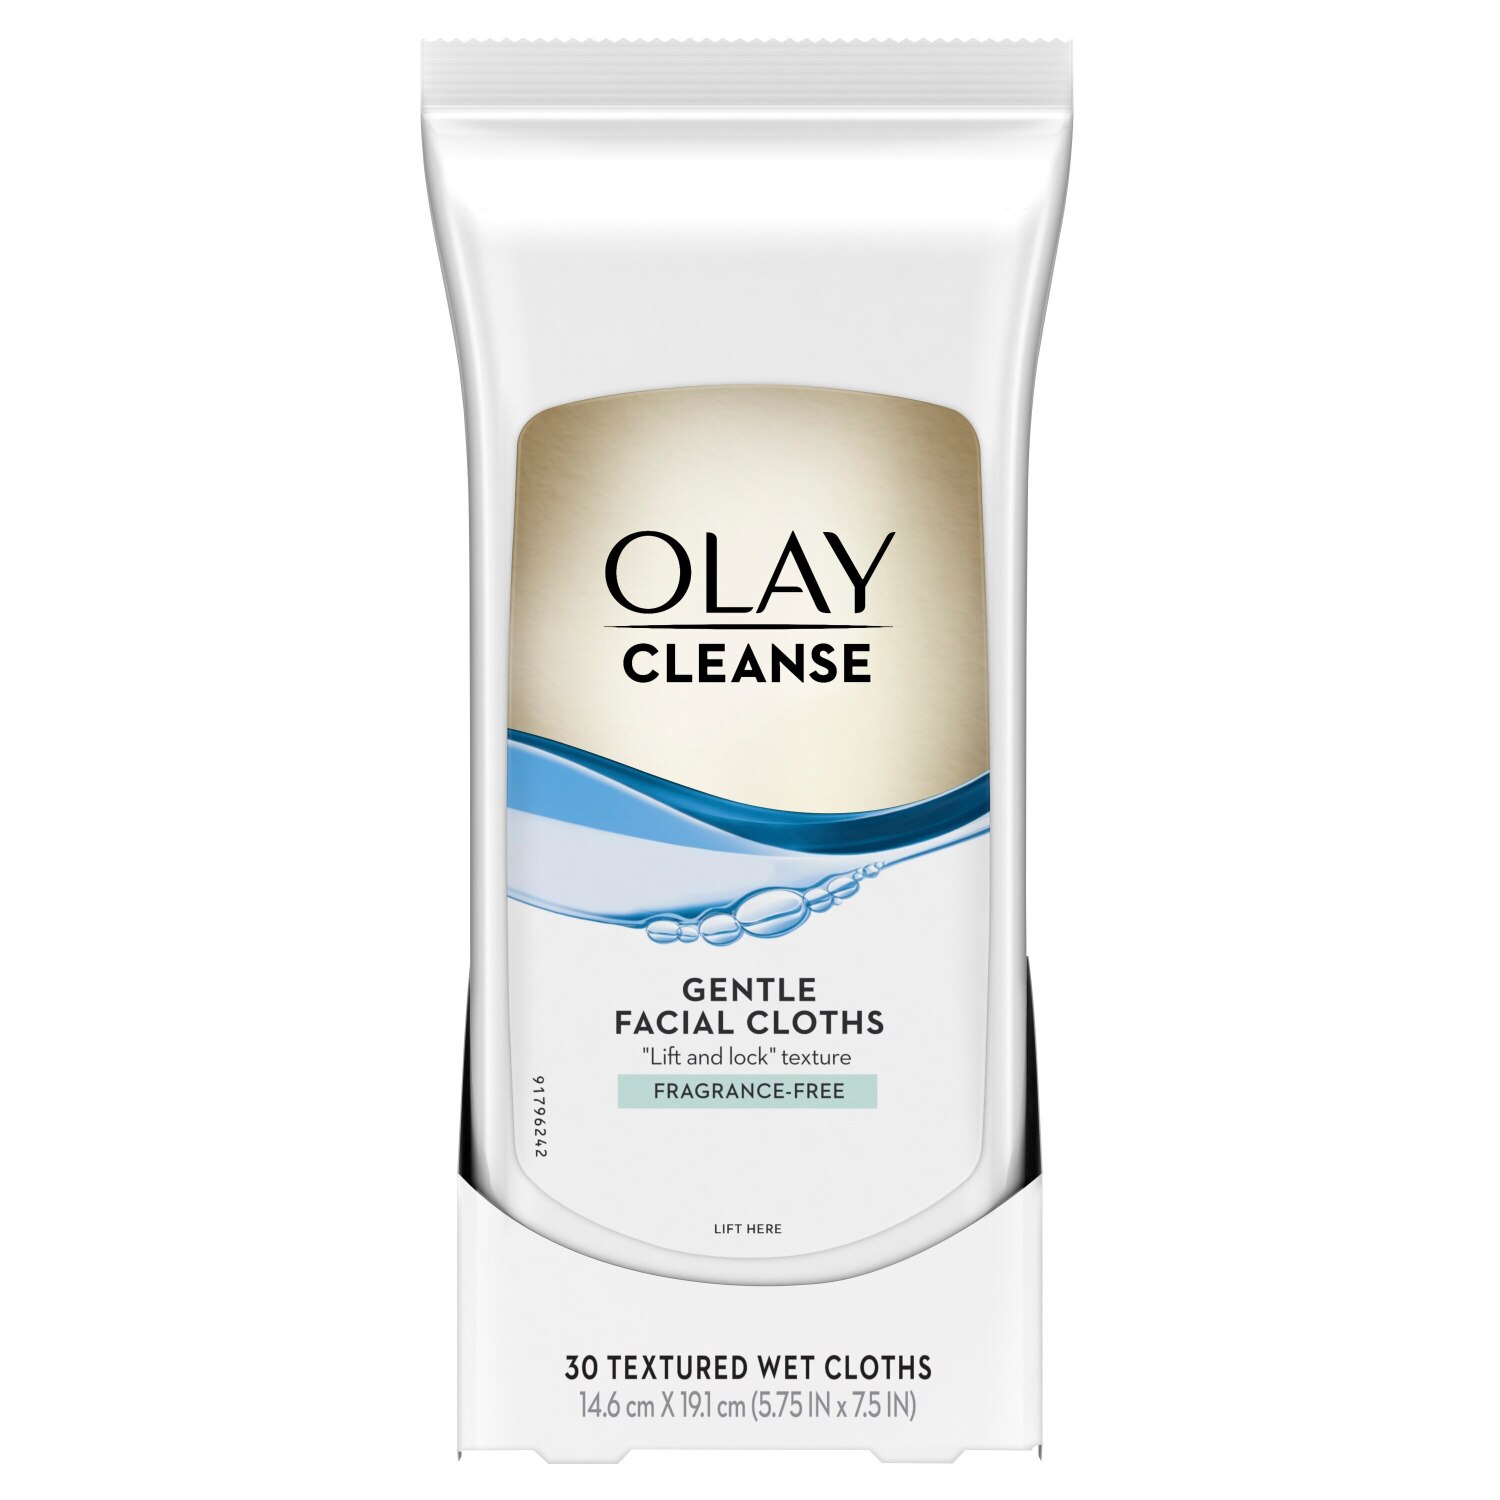 Olay Cleanse Gentle Facial Cloths, Fragrance Free, 30CT